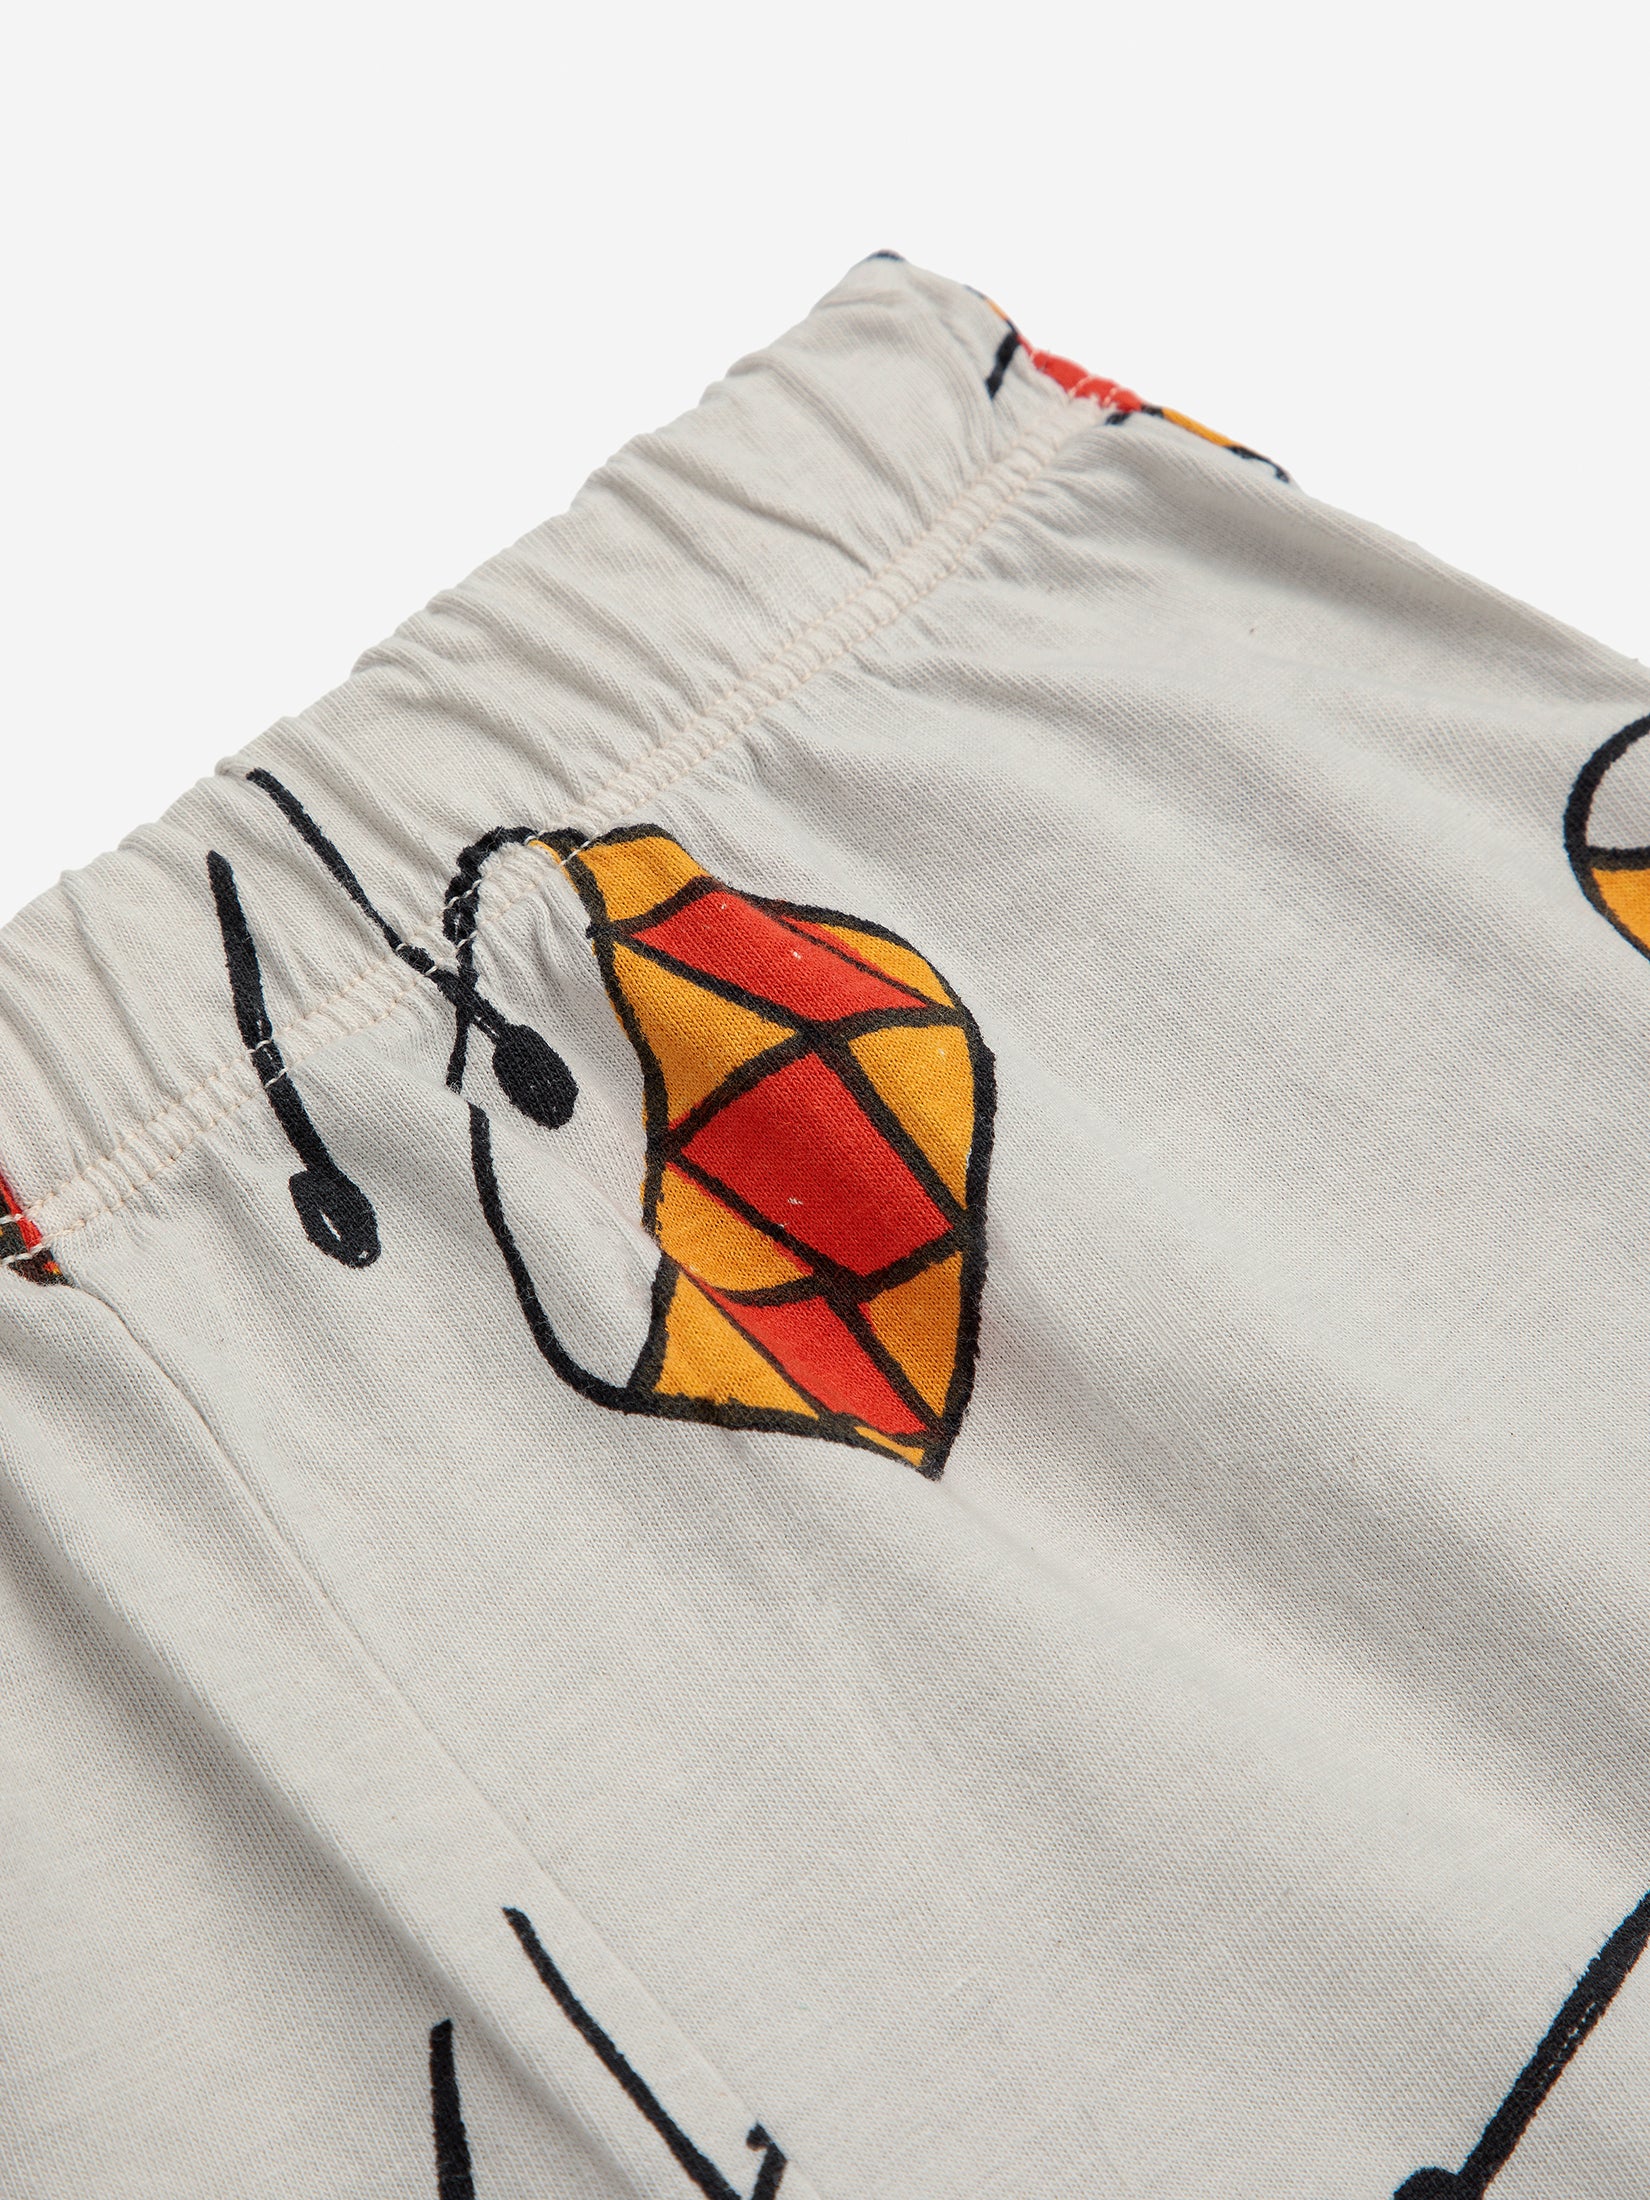 Bobo Choses | Play The Drum all over shorts